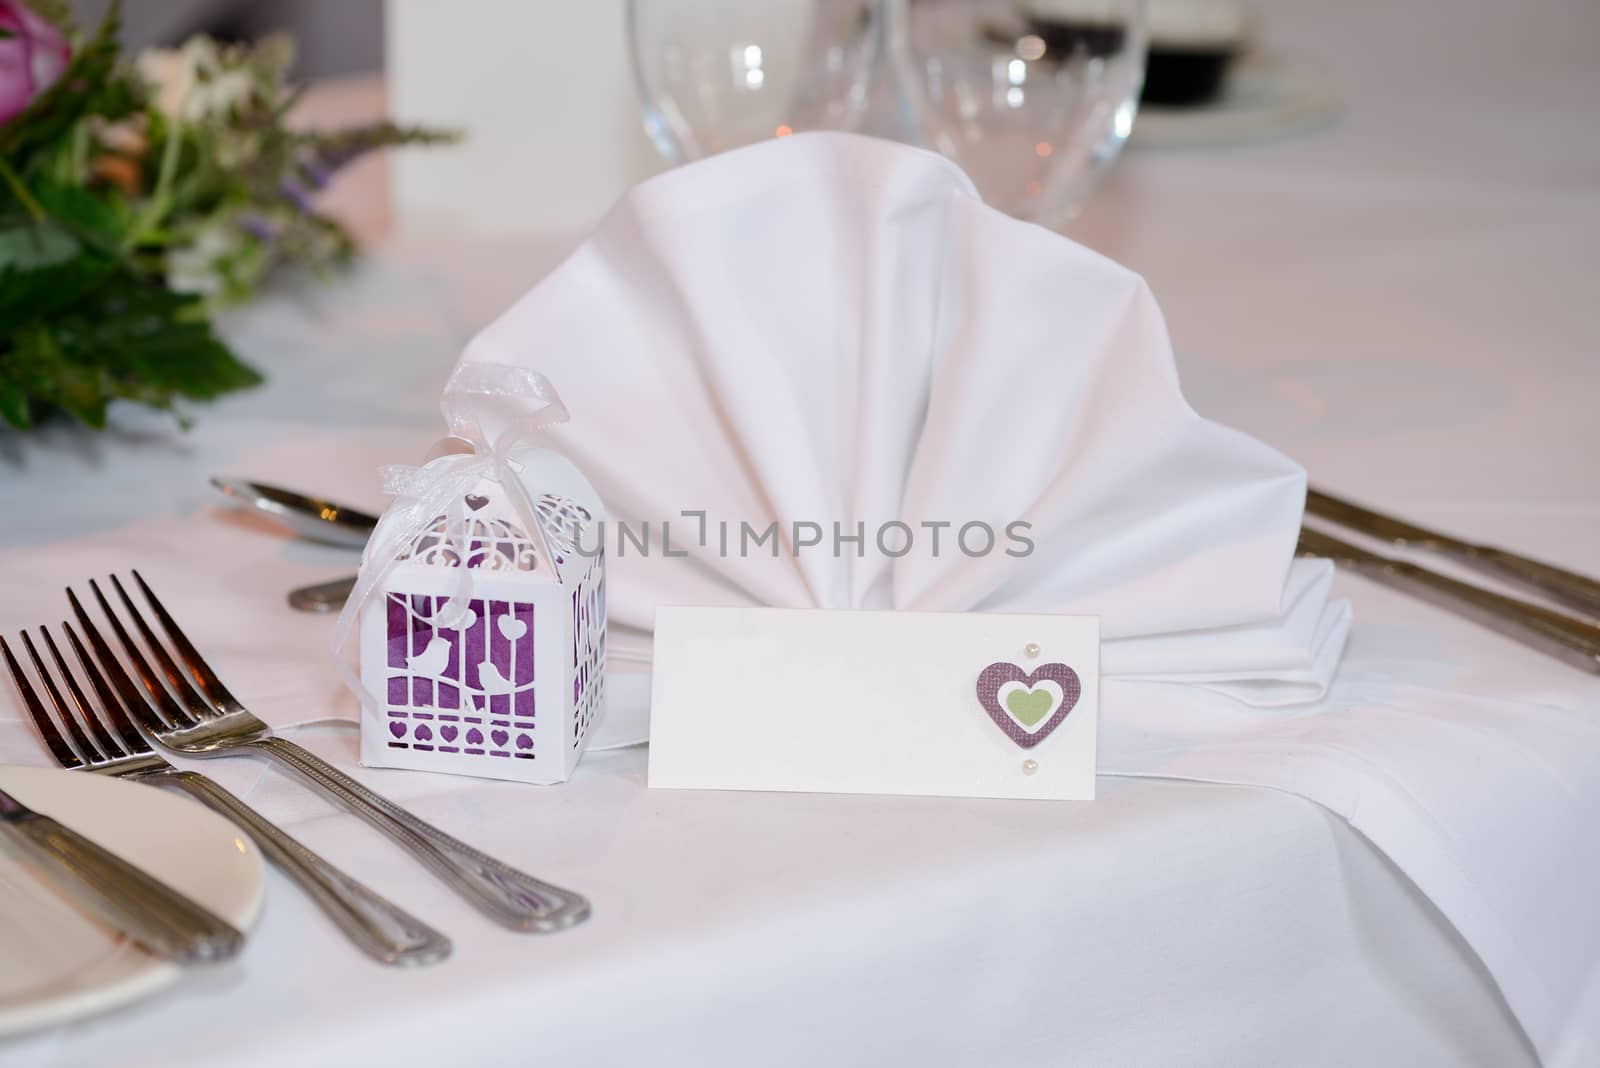 Banquet table detail by kmwphotography